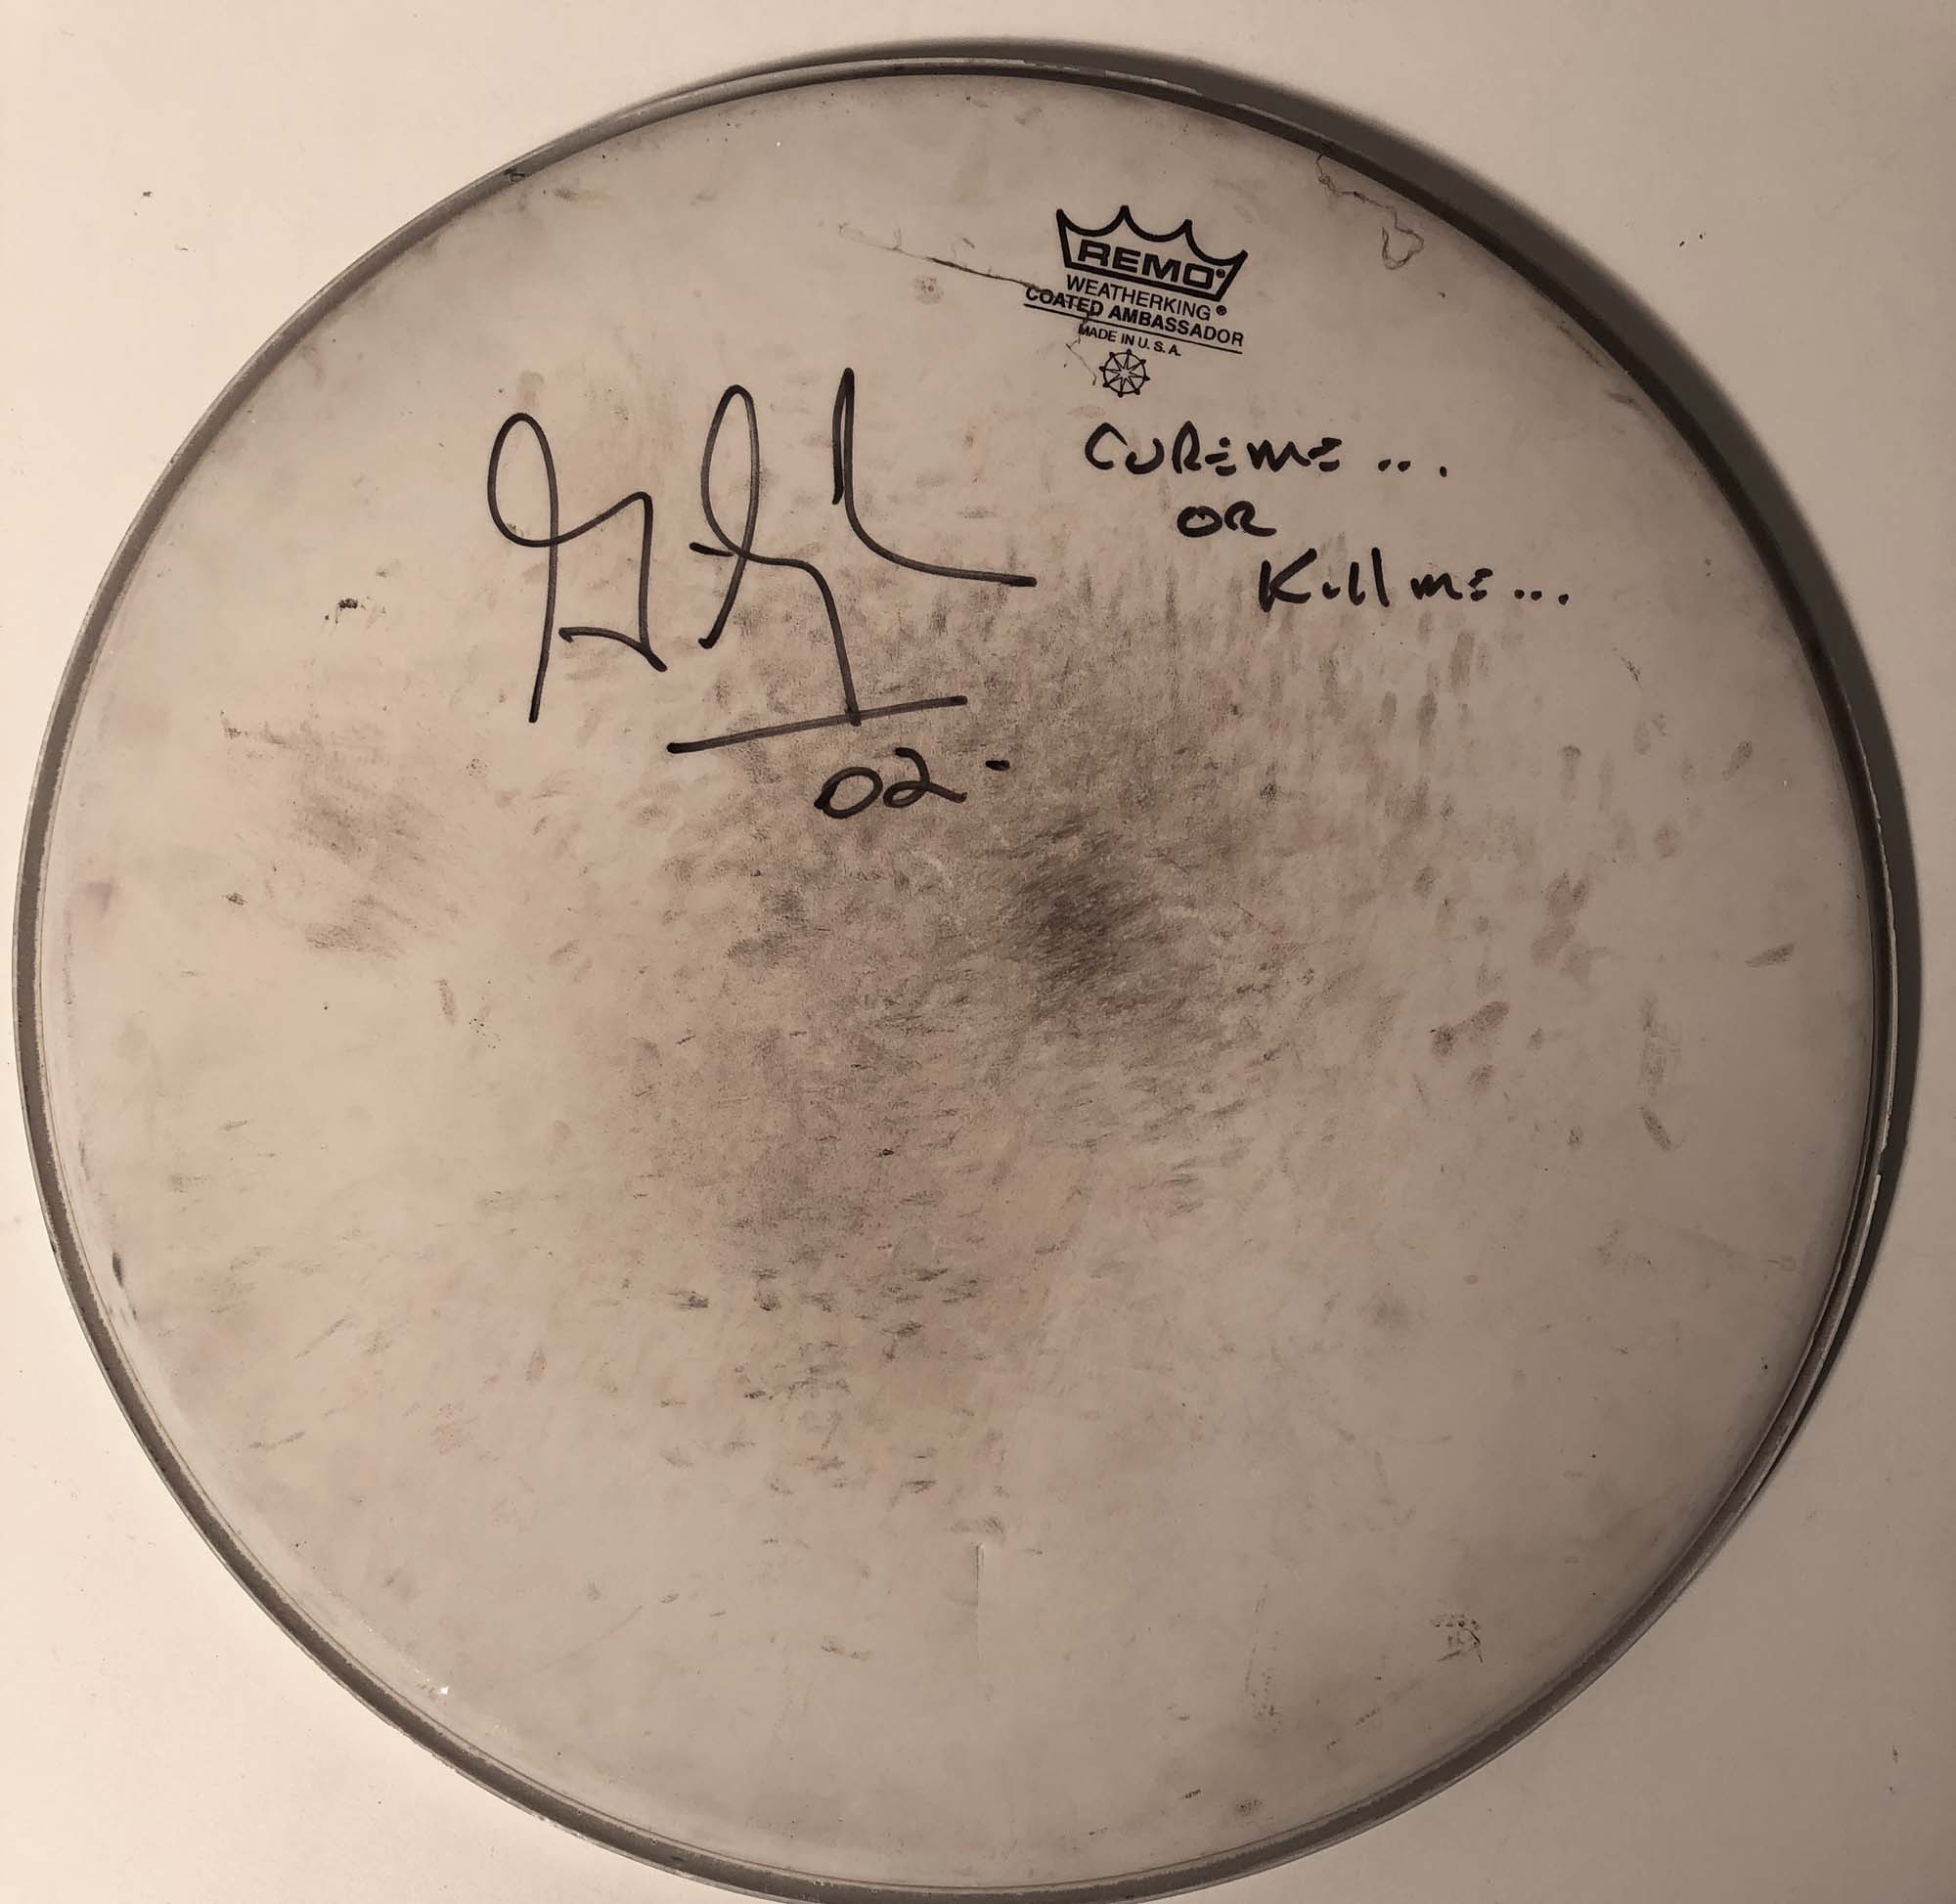 SIGNED DRUM SKINS/METAL BANDS PROMO ITEMS. - Image 4 of 6